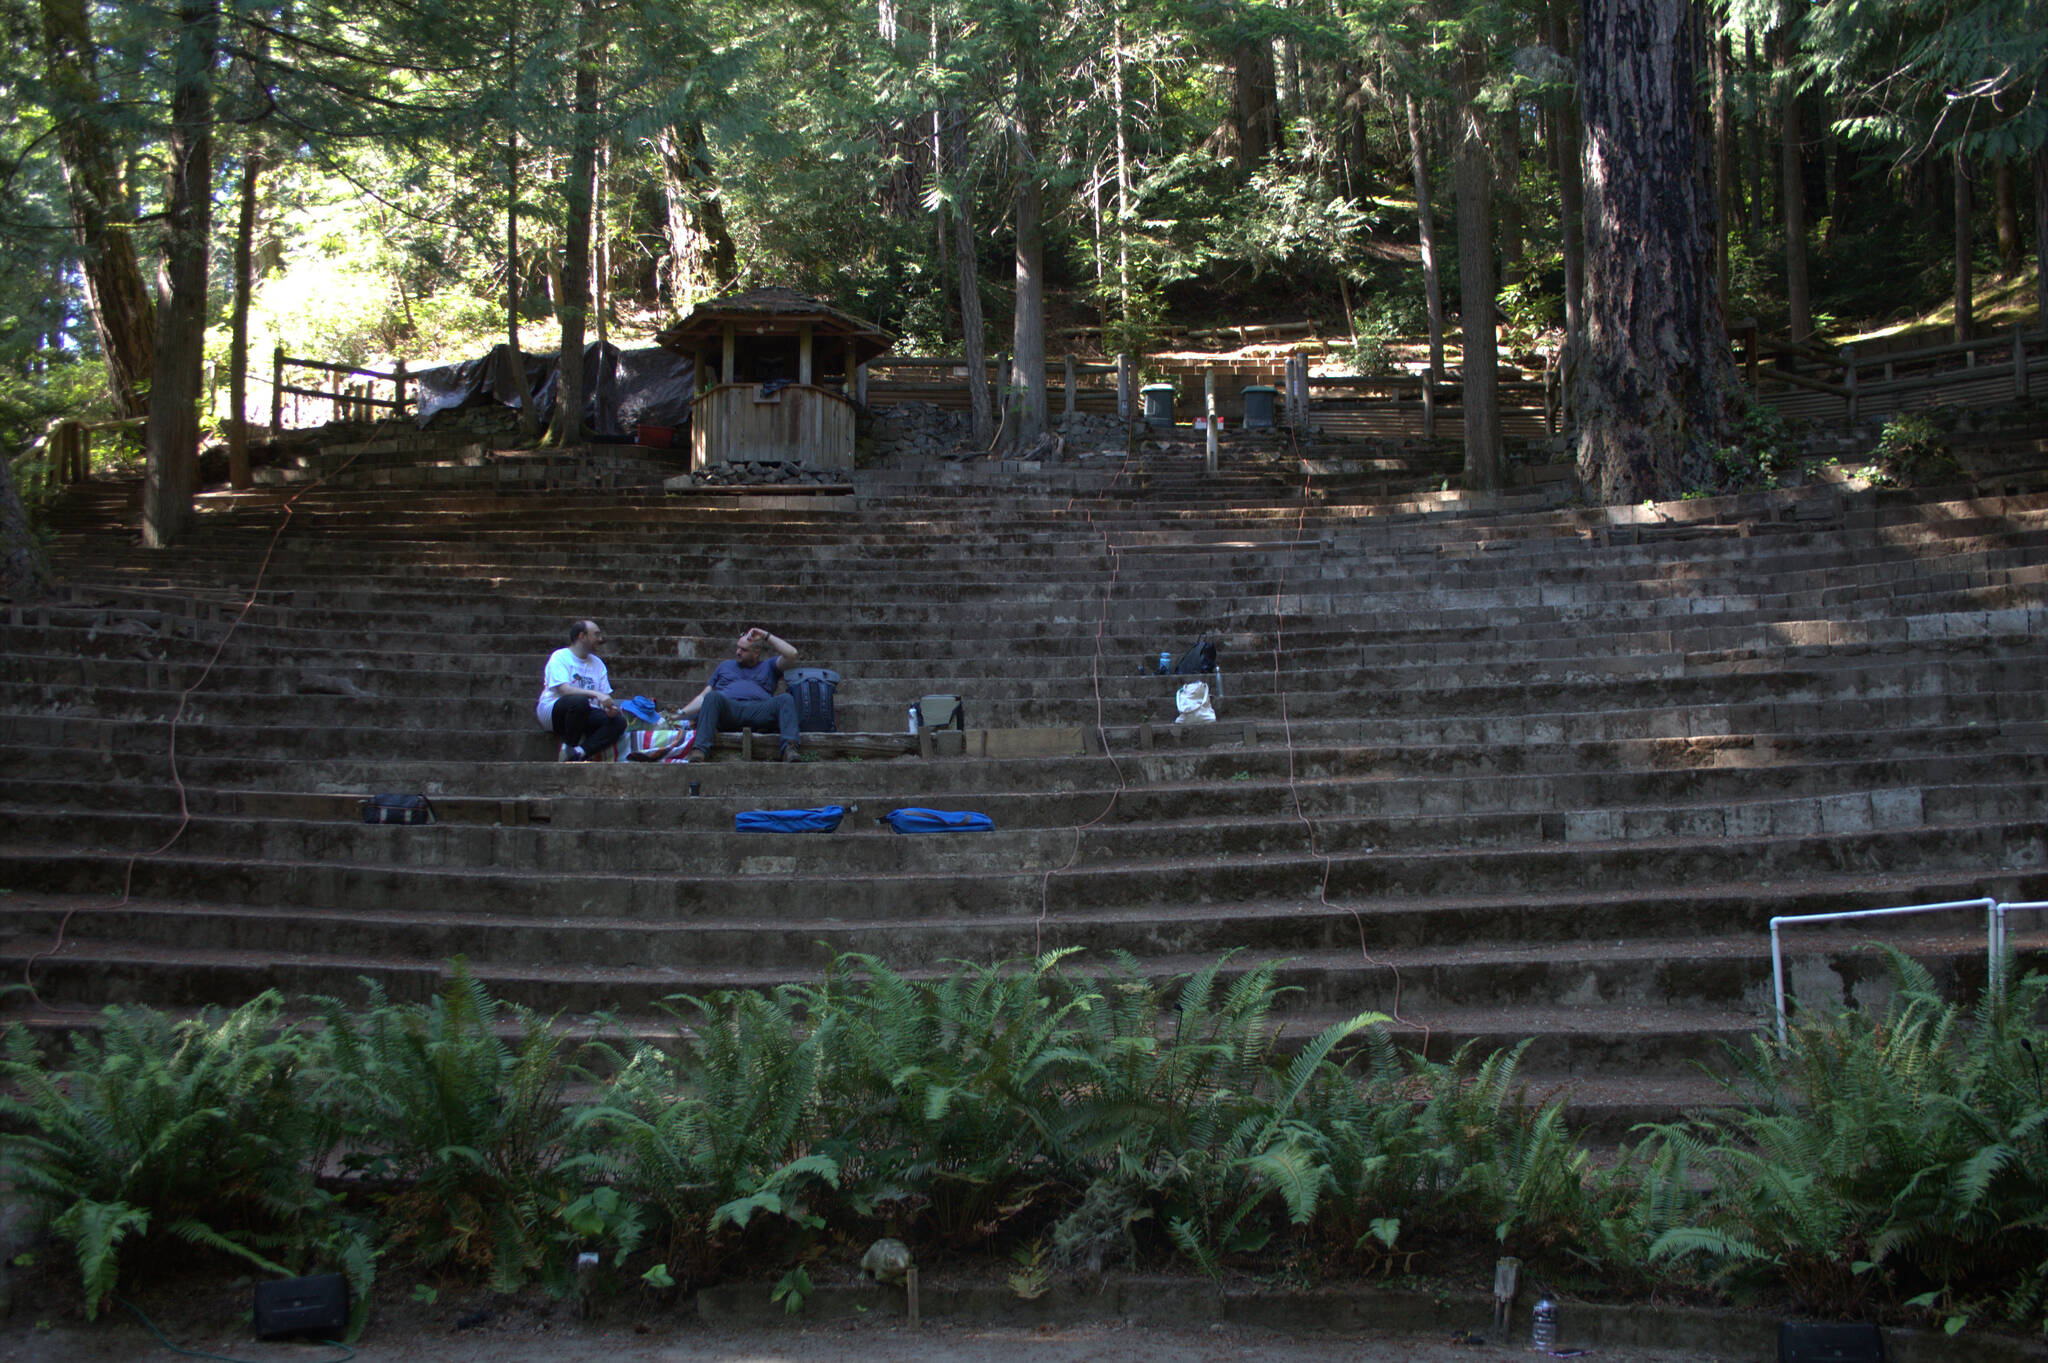 A view of the stands from the stage area in the Kitsap Forest Theater.